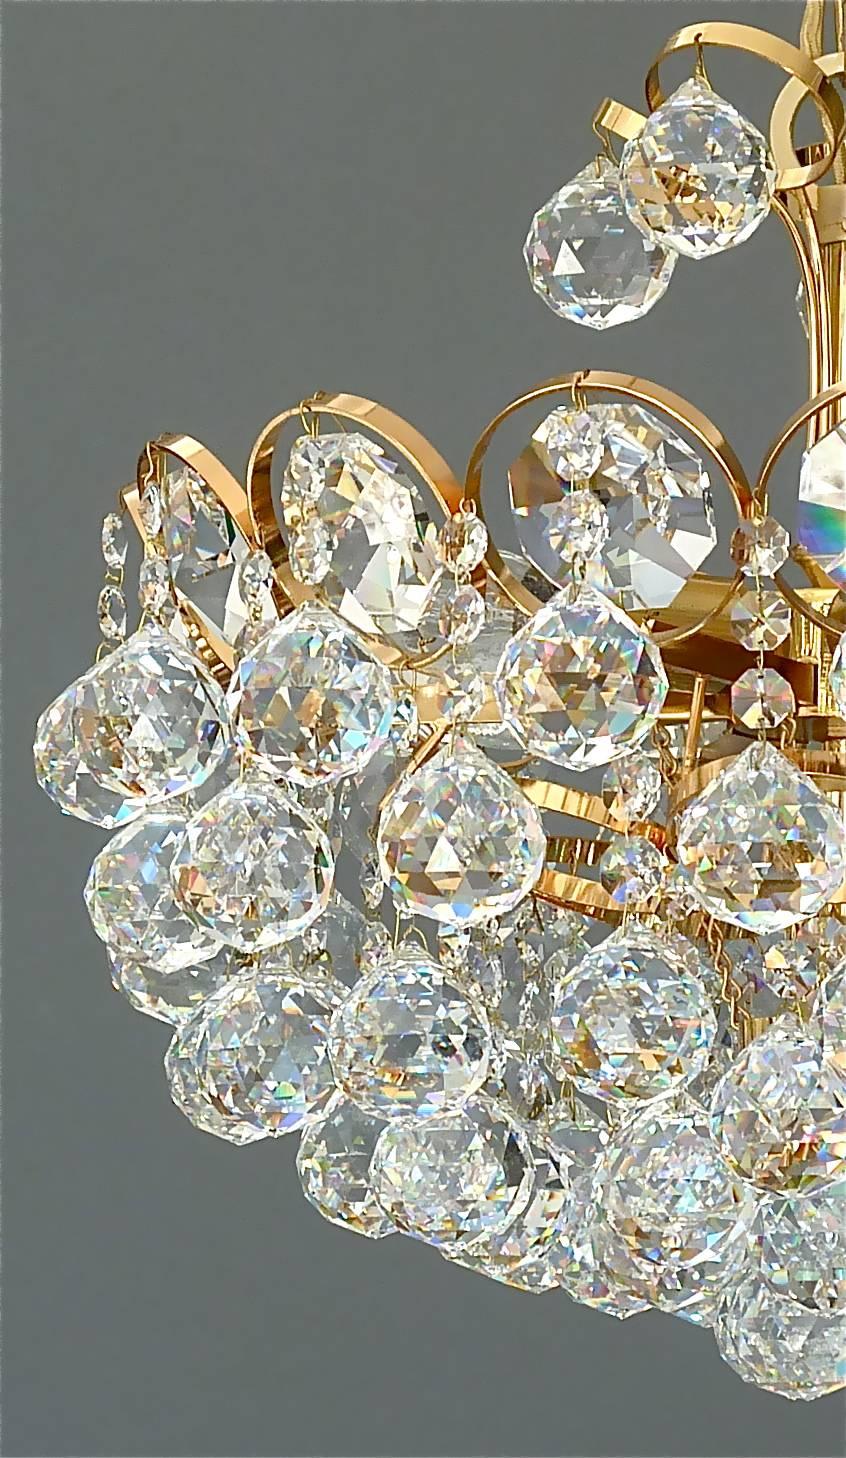 German Luxus Palwa Midcentury Chandelier Gilt Brass Faceted Crystal Glass Globes, 1960